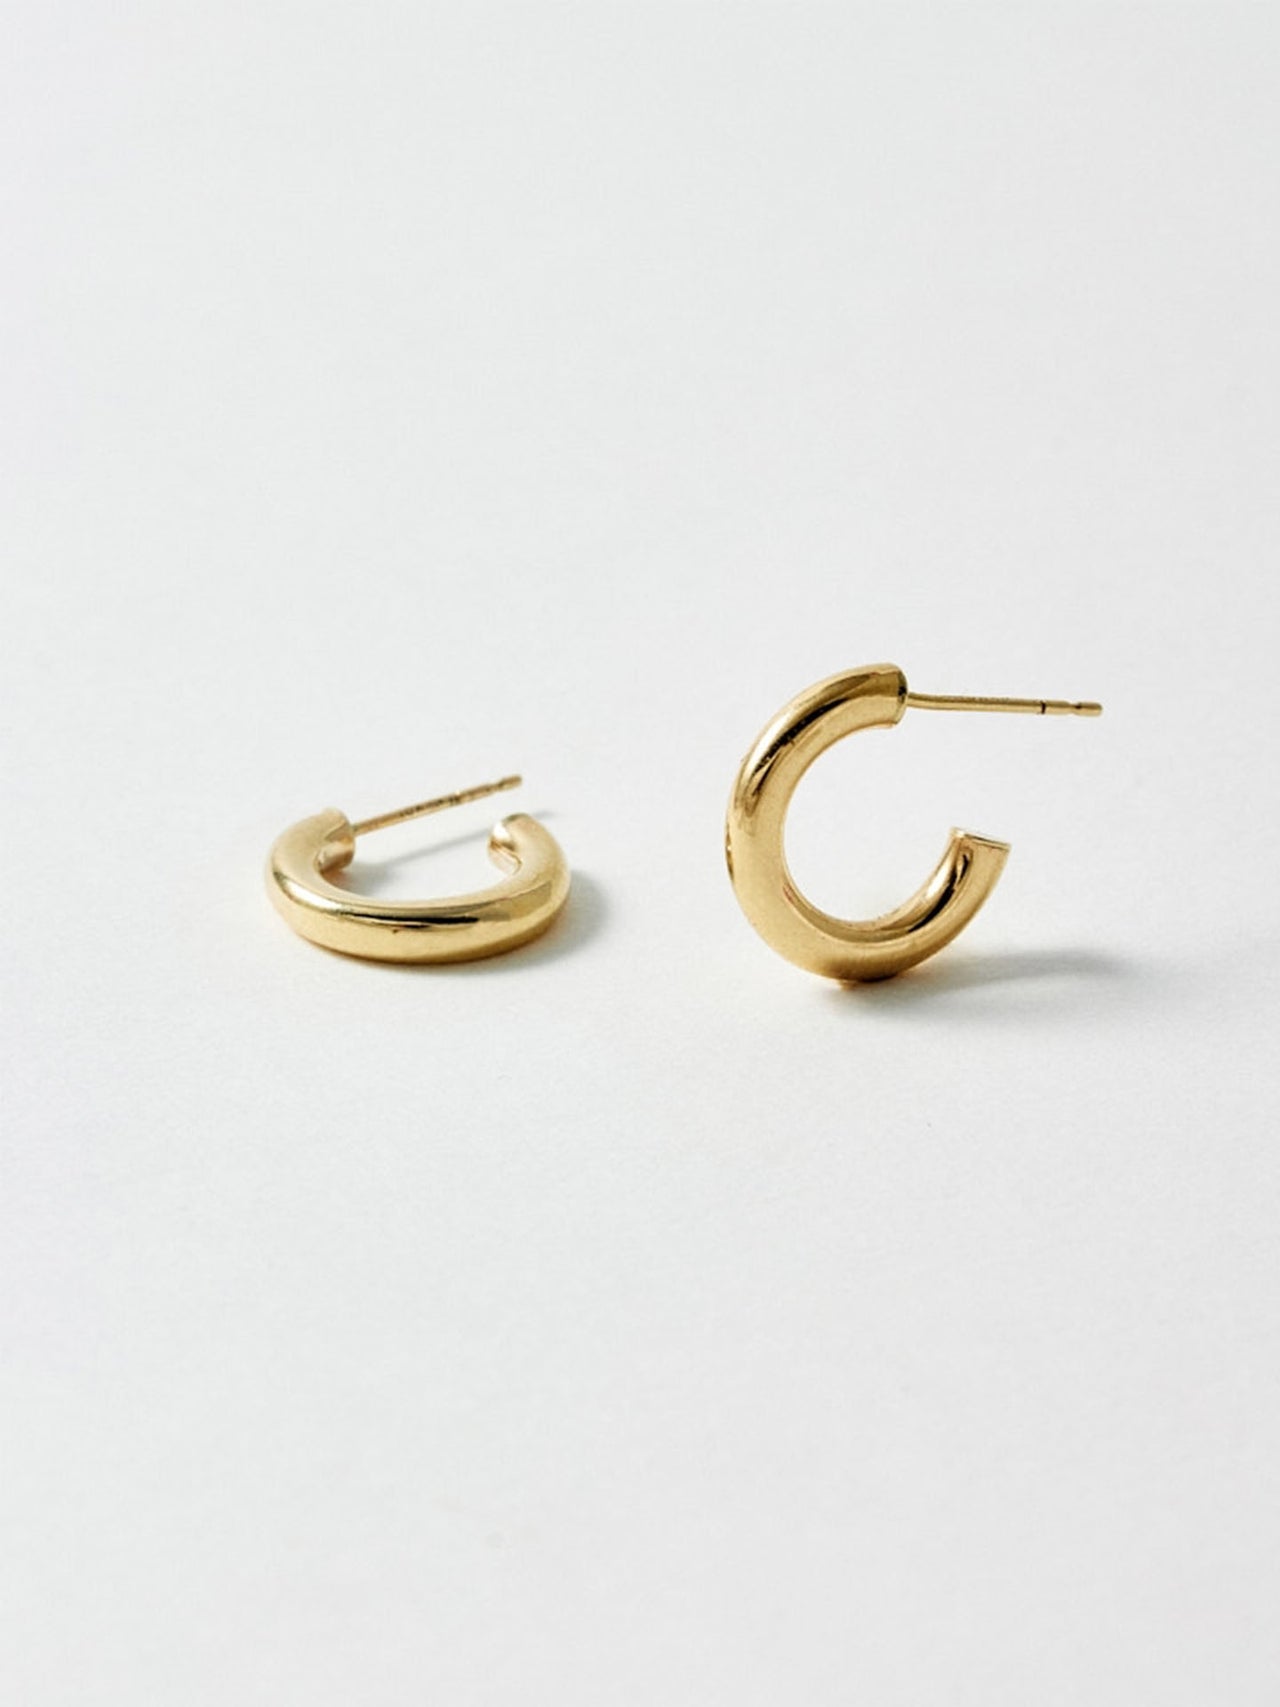 Styled product shot of the Chubbie Huggies (10Kt shinyYellow Gold Mini Tube Hoop Earrings Diameter: 16.51mm Thickness: 3mm) Background: Grey Backdrop